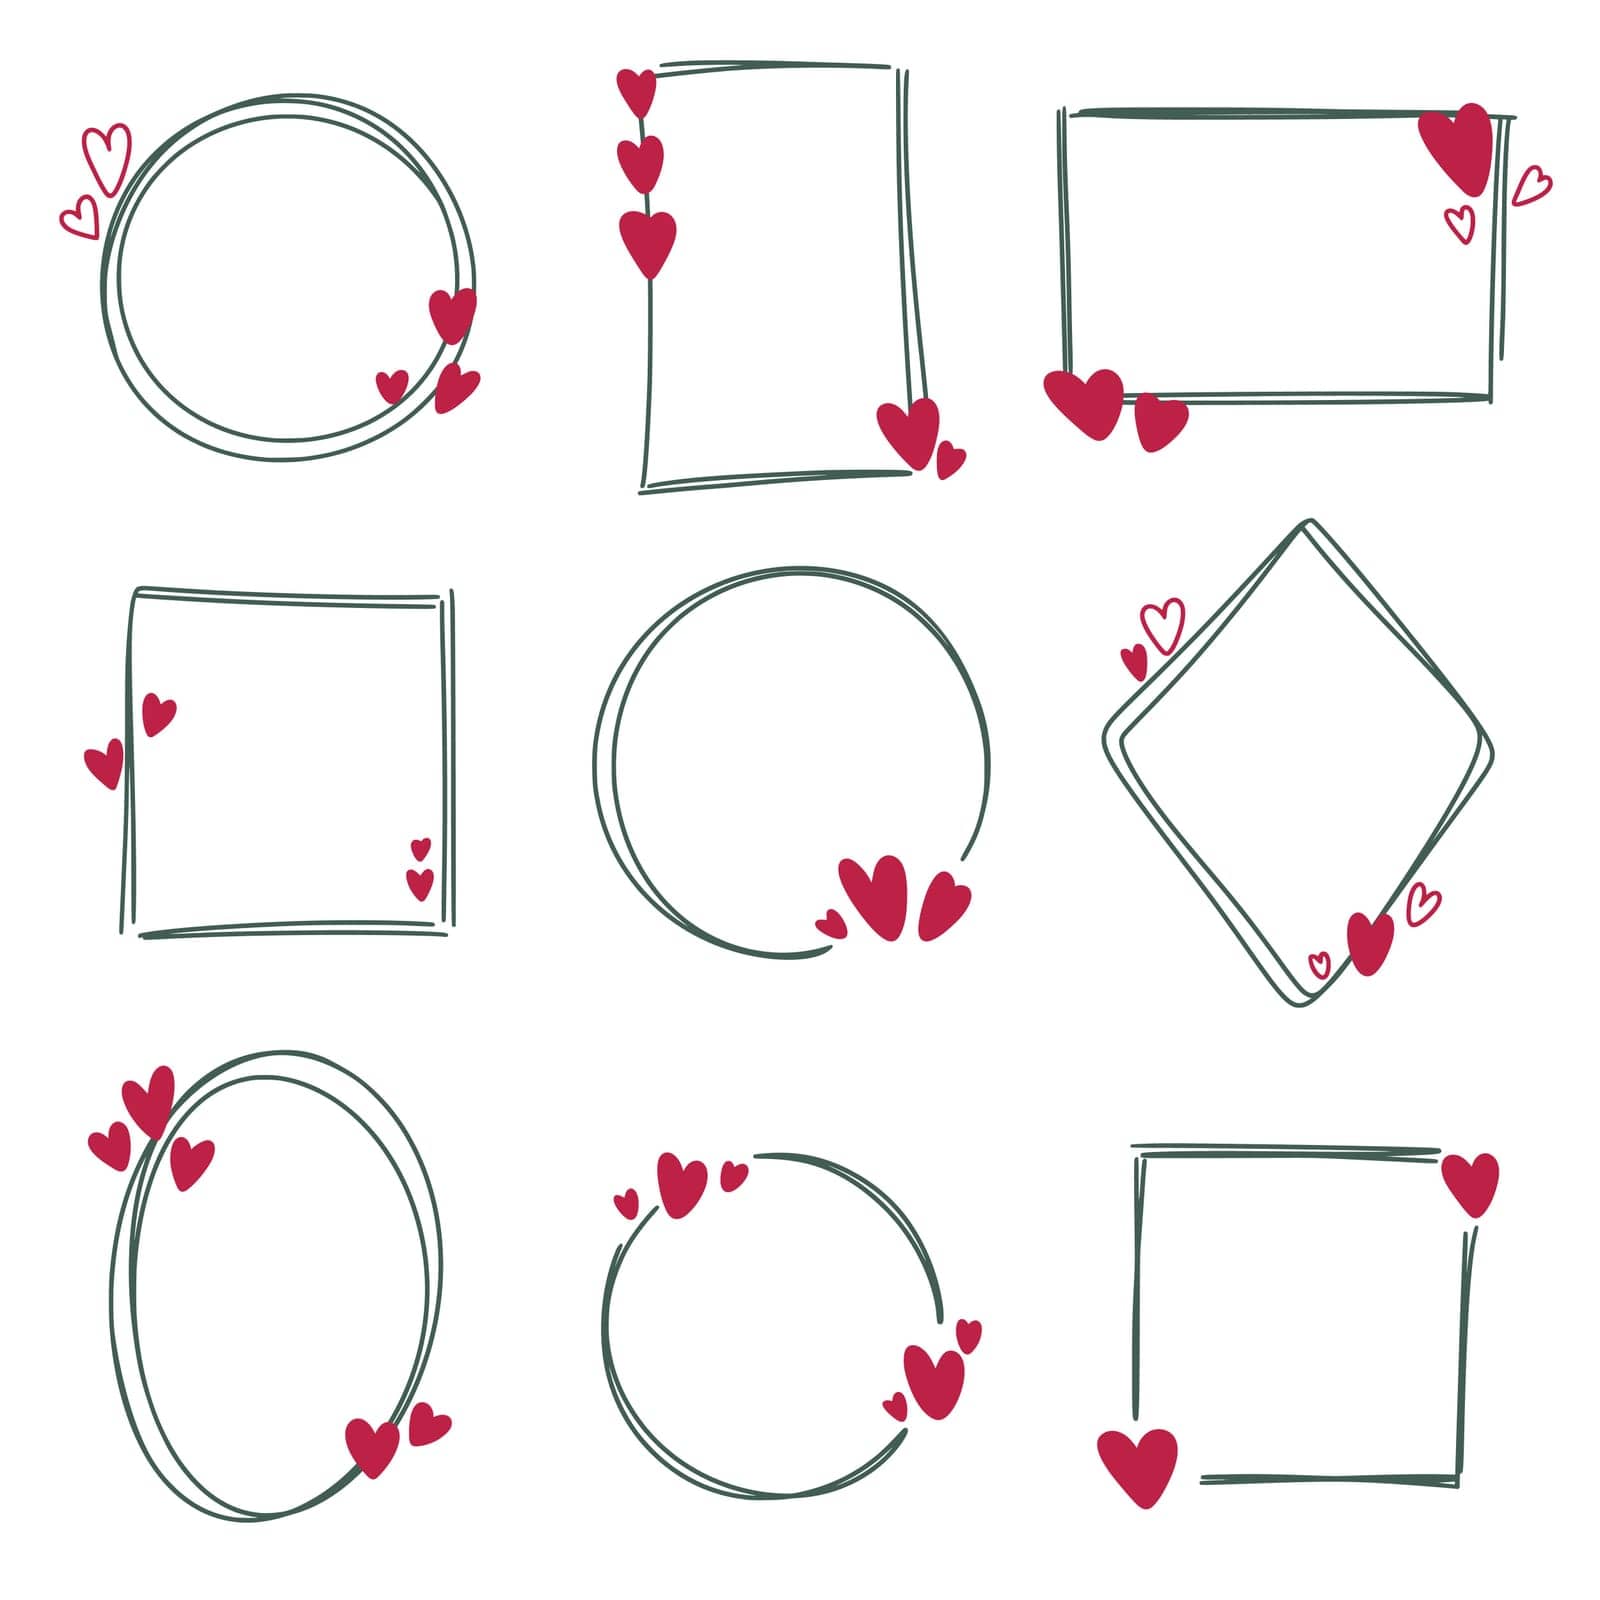 Hand drawn frames with hearts set. Sketch shapes round, oval, square, rectangular, rhombus. Cute wreaths for invitations and postcards. Rims with hearts for valentines day or wedding. Flat isolated illustration, vector